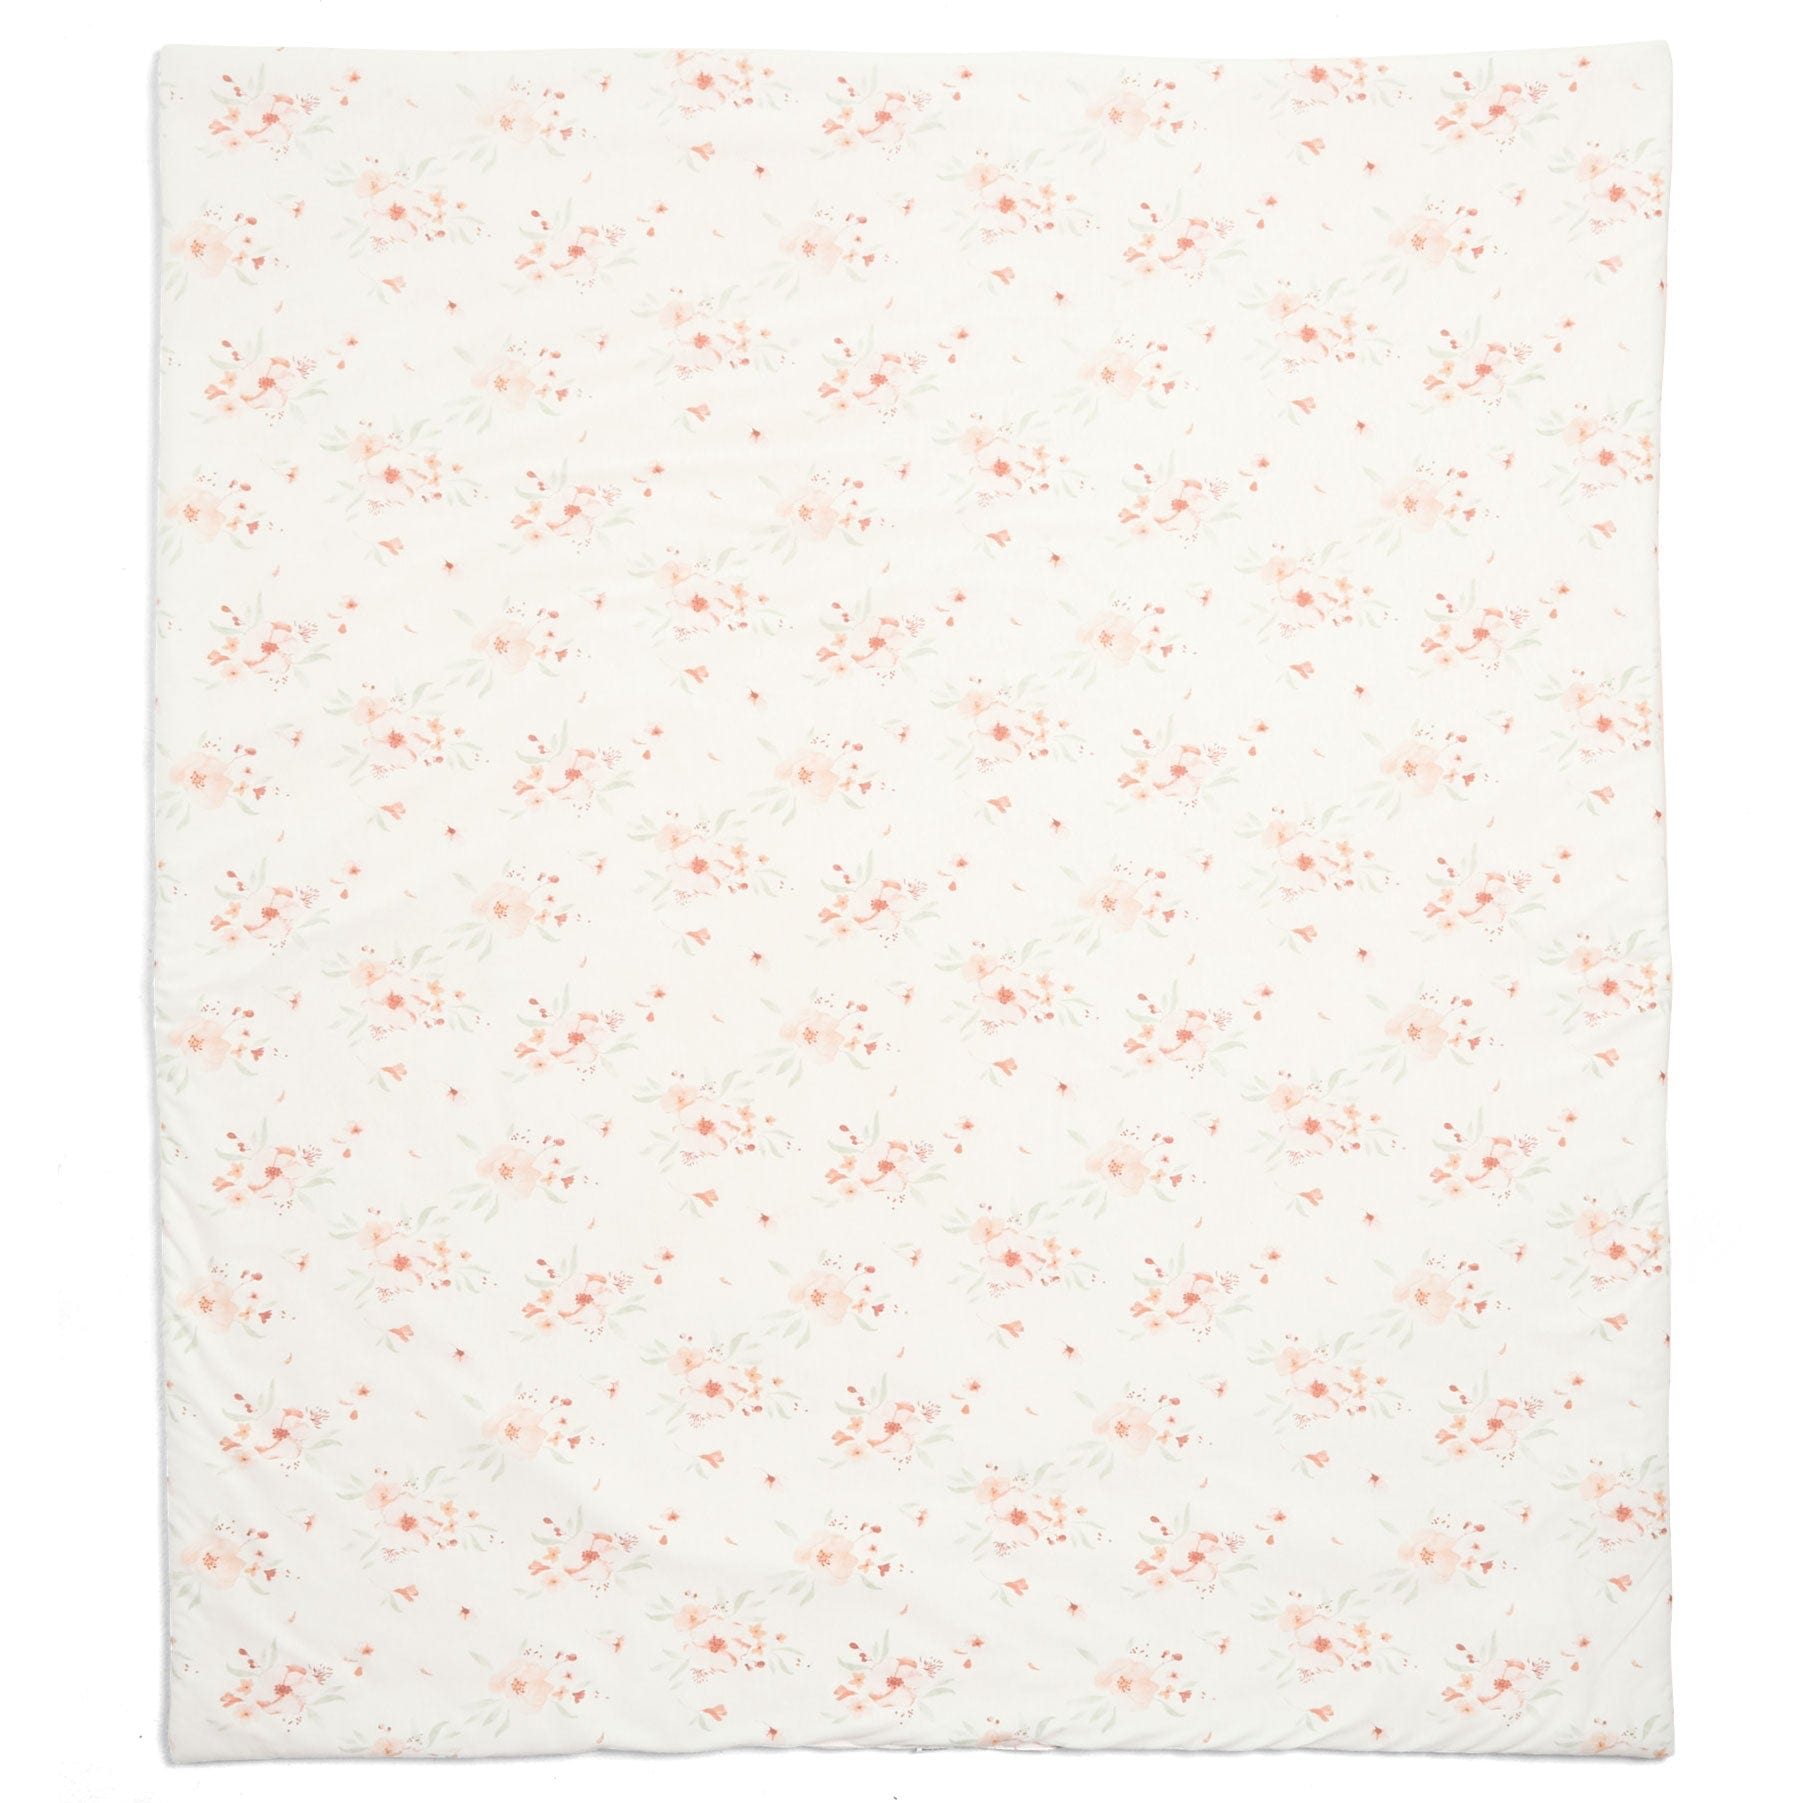 M&P Welcome to the World Cot Bed Quilt in Floral Spot Cot & Cot Bed Quilts 7041X1600 5057232013303